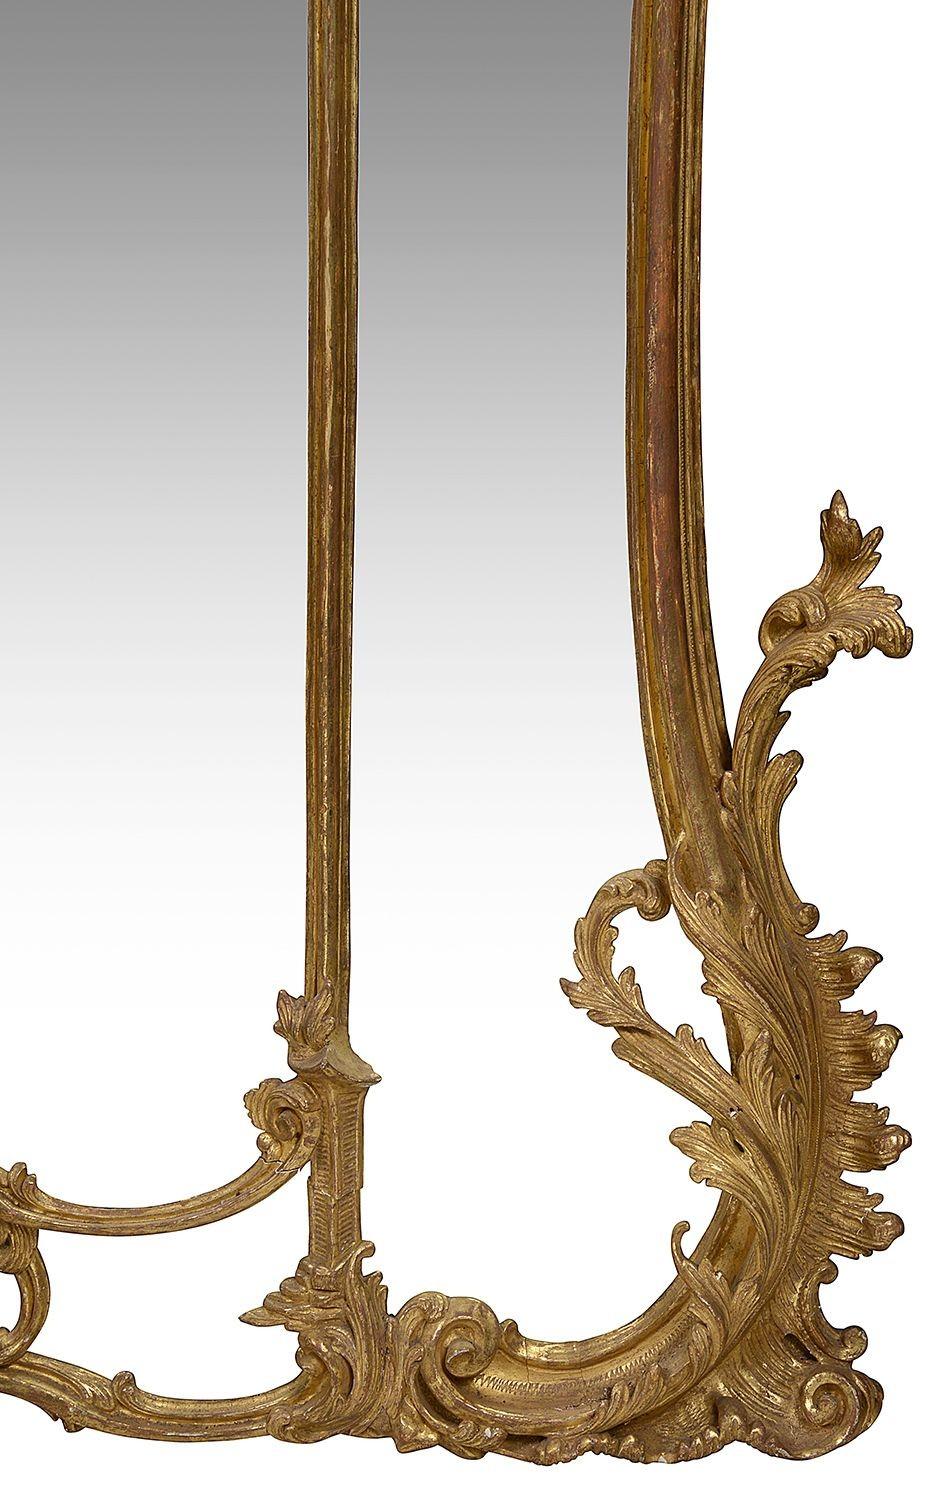 Hand-Carved 19th Century Carved Gilt Wood Chippendale Style over Mantel Wall Mirror